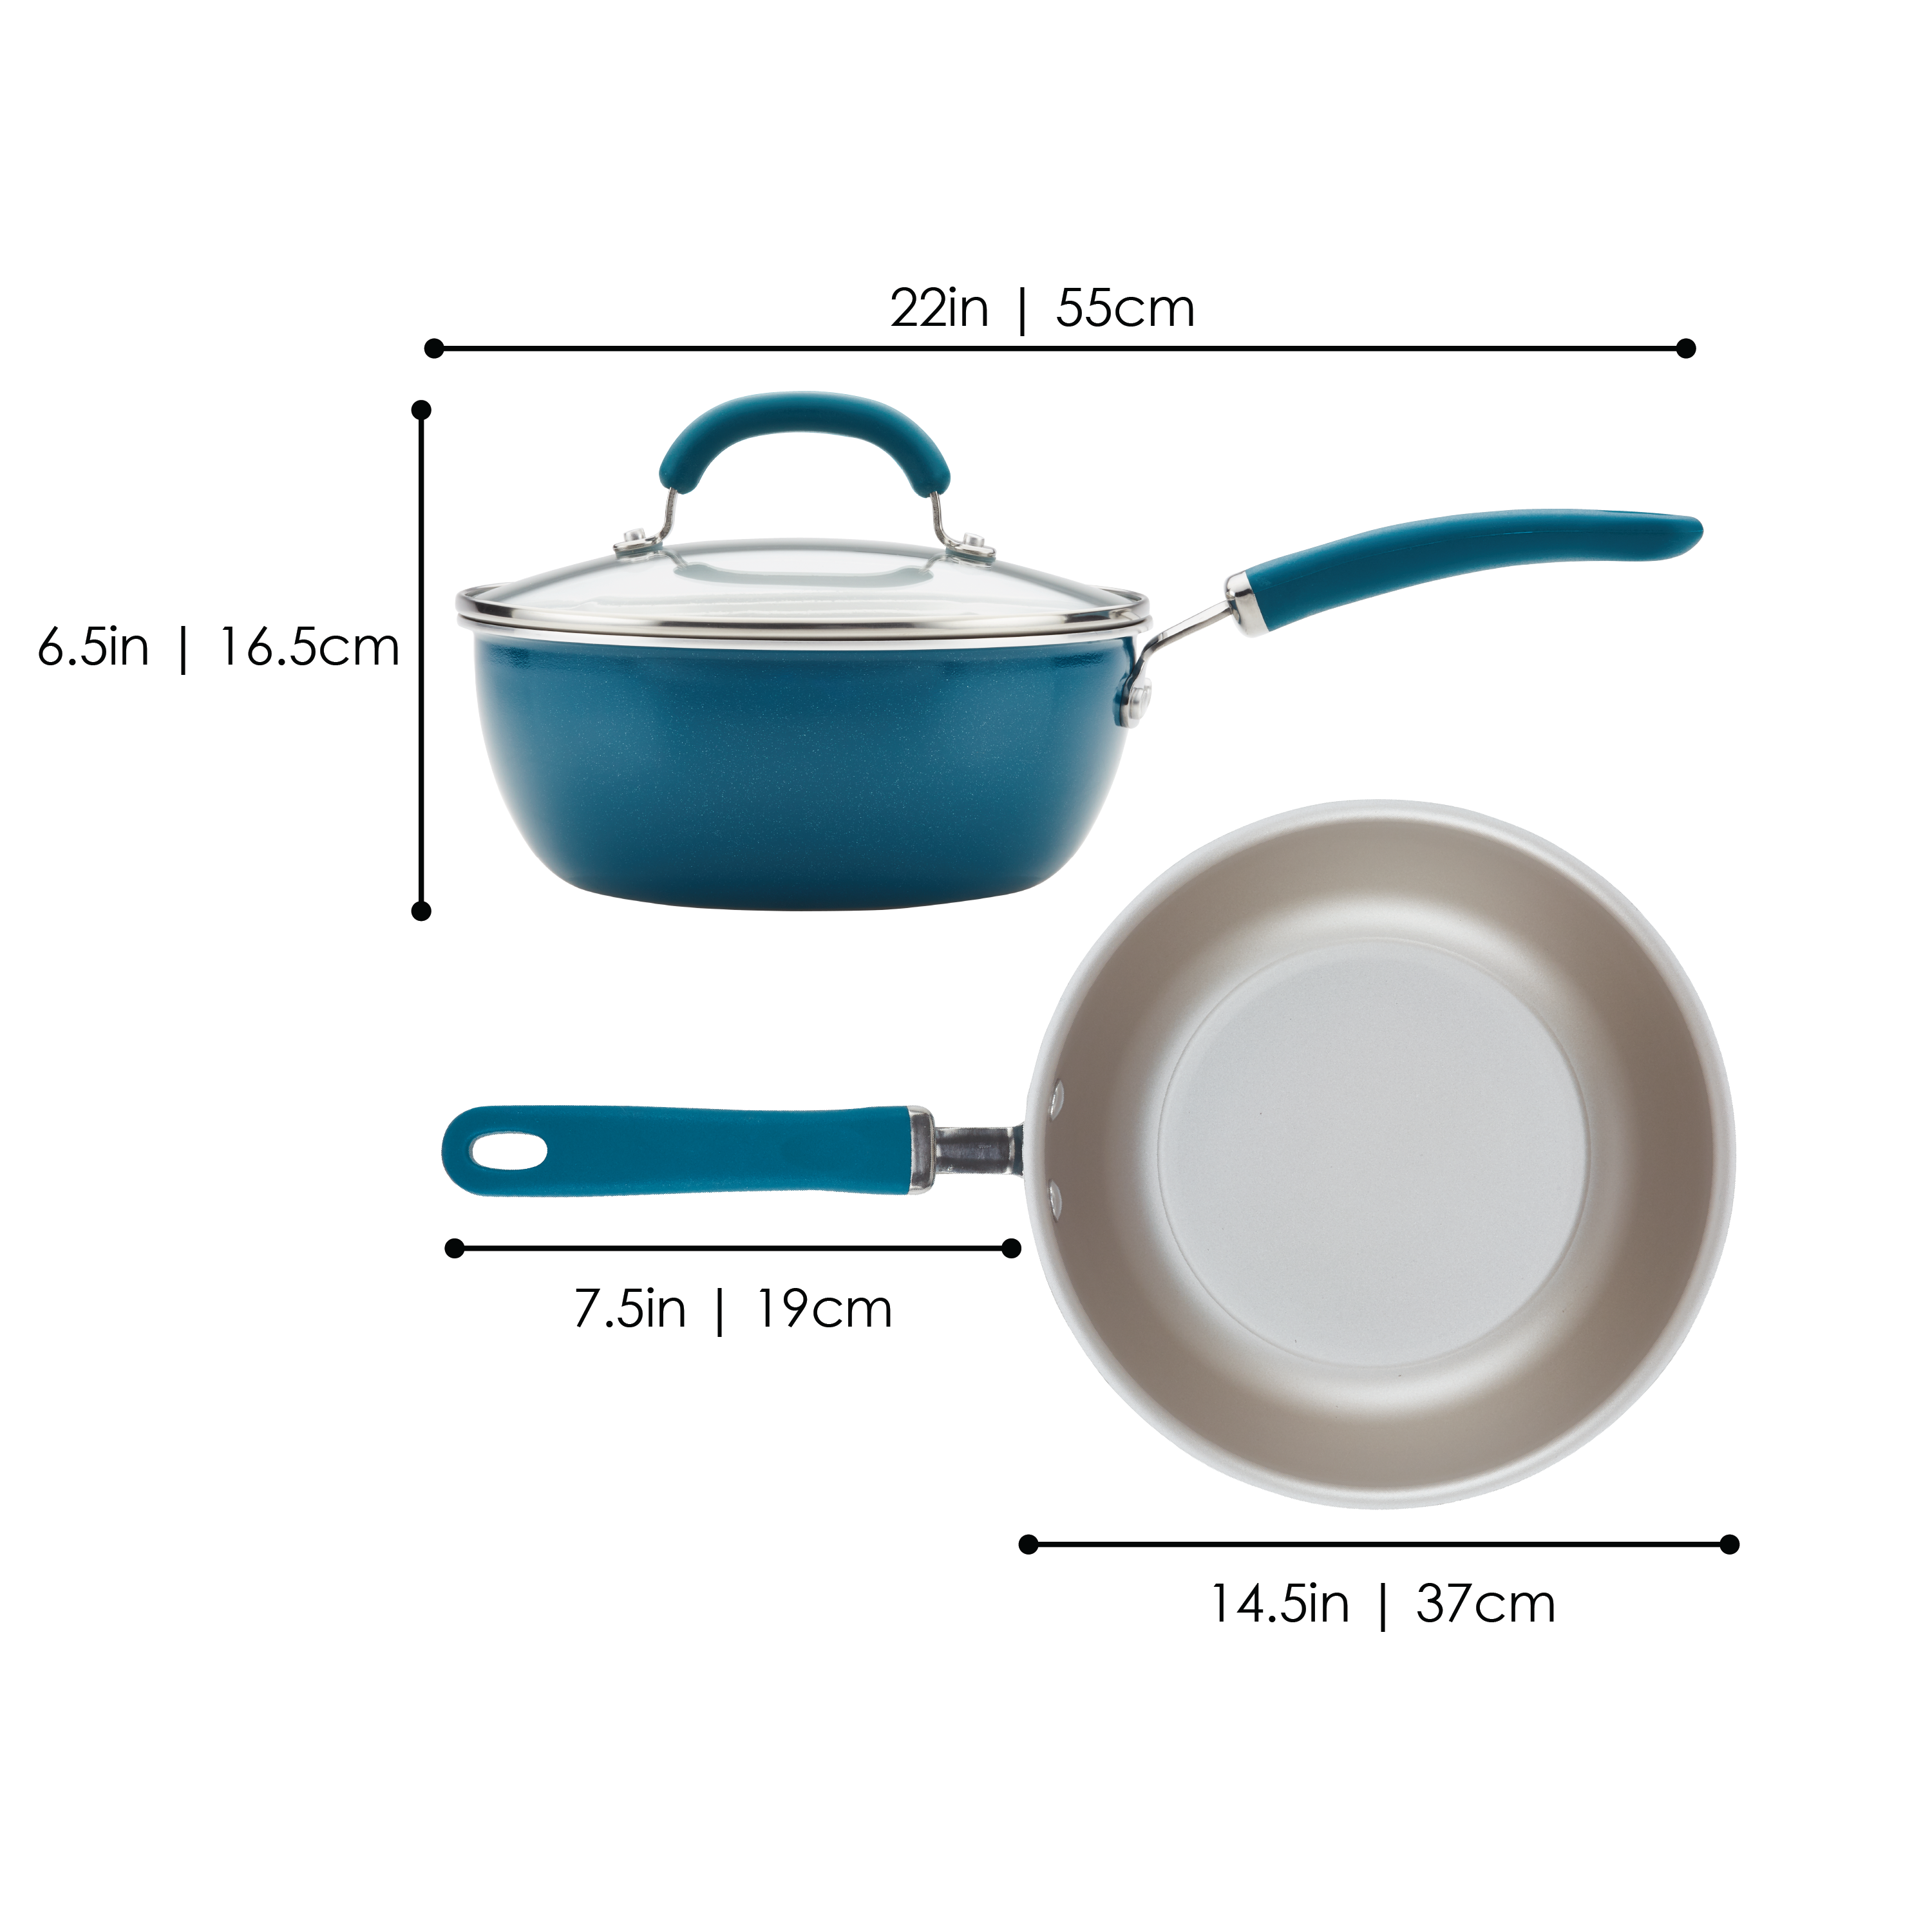 Rachael Ray 13 Piece Induction Safe Non-stick Cookware Set Teal